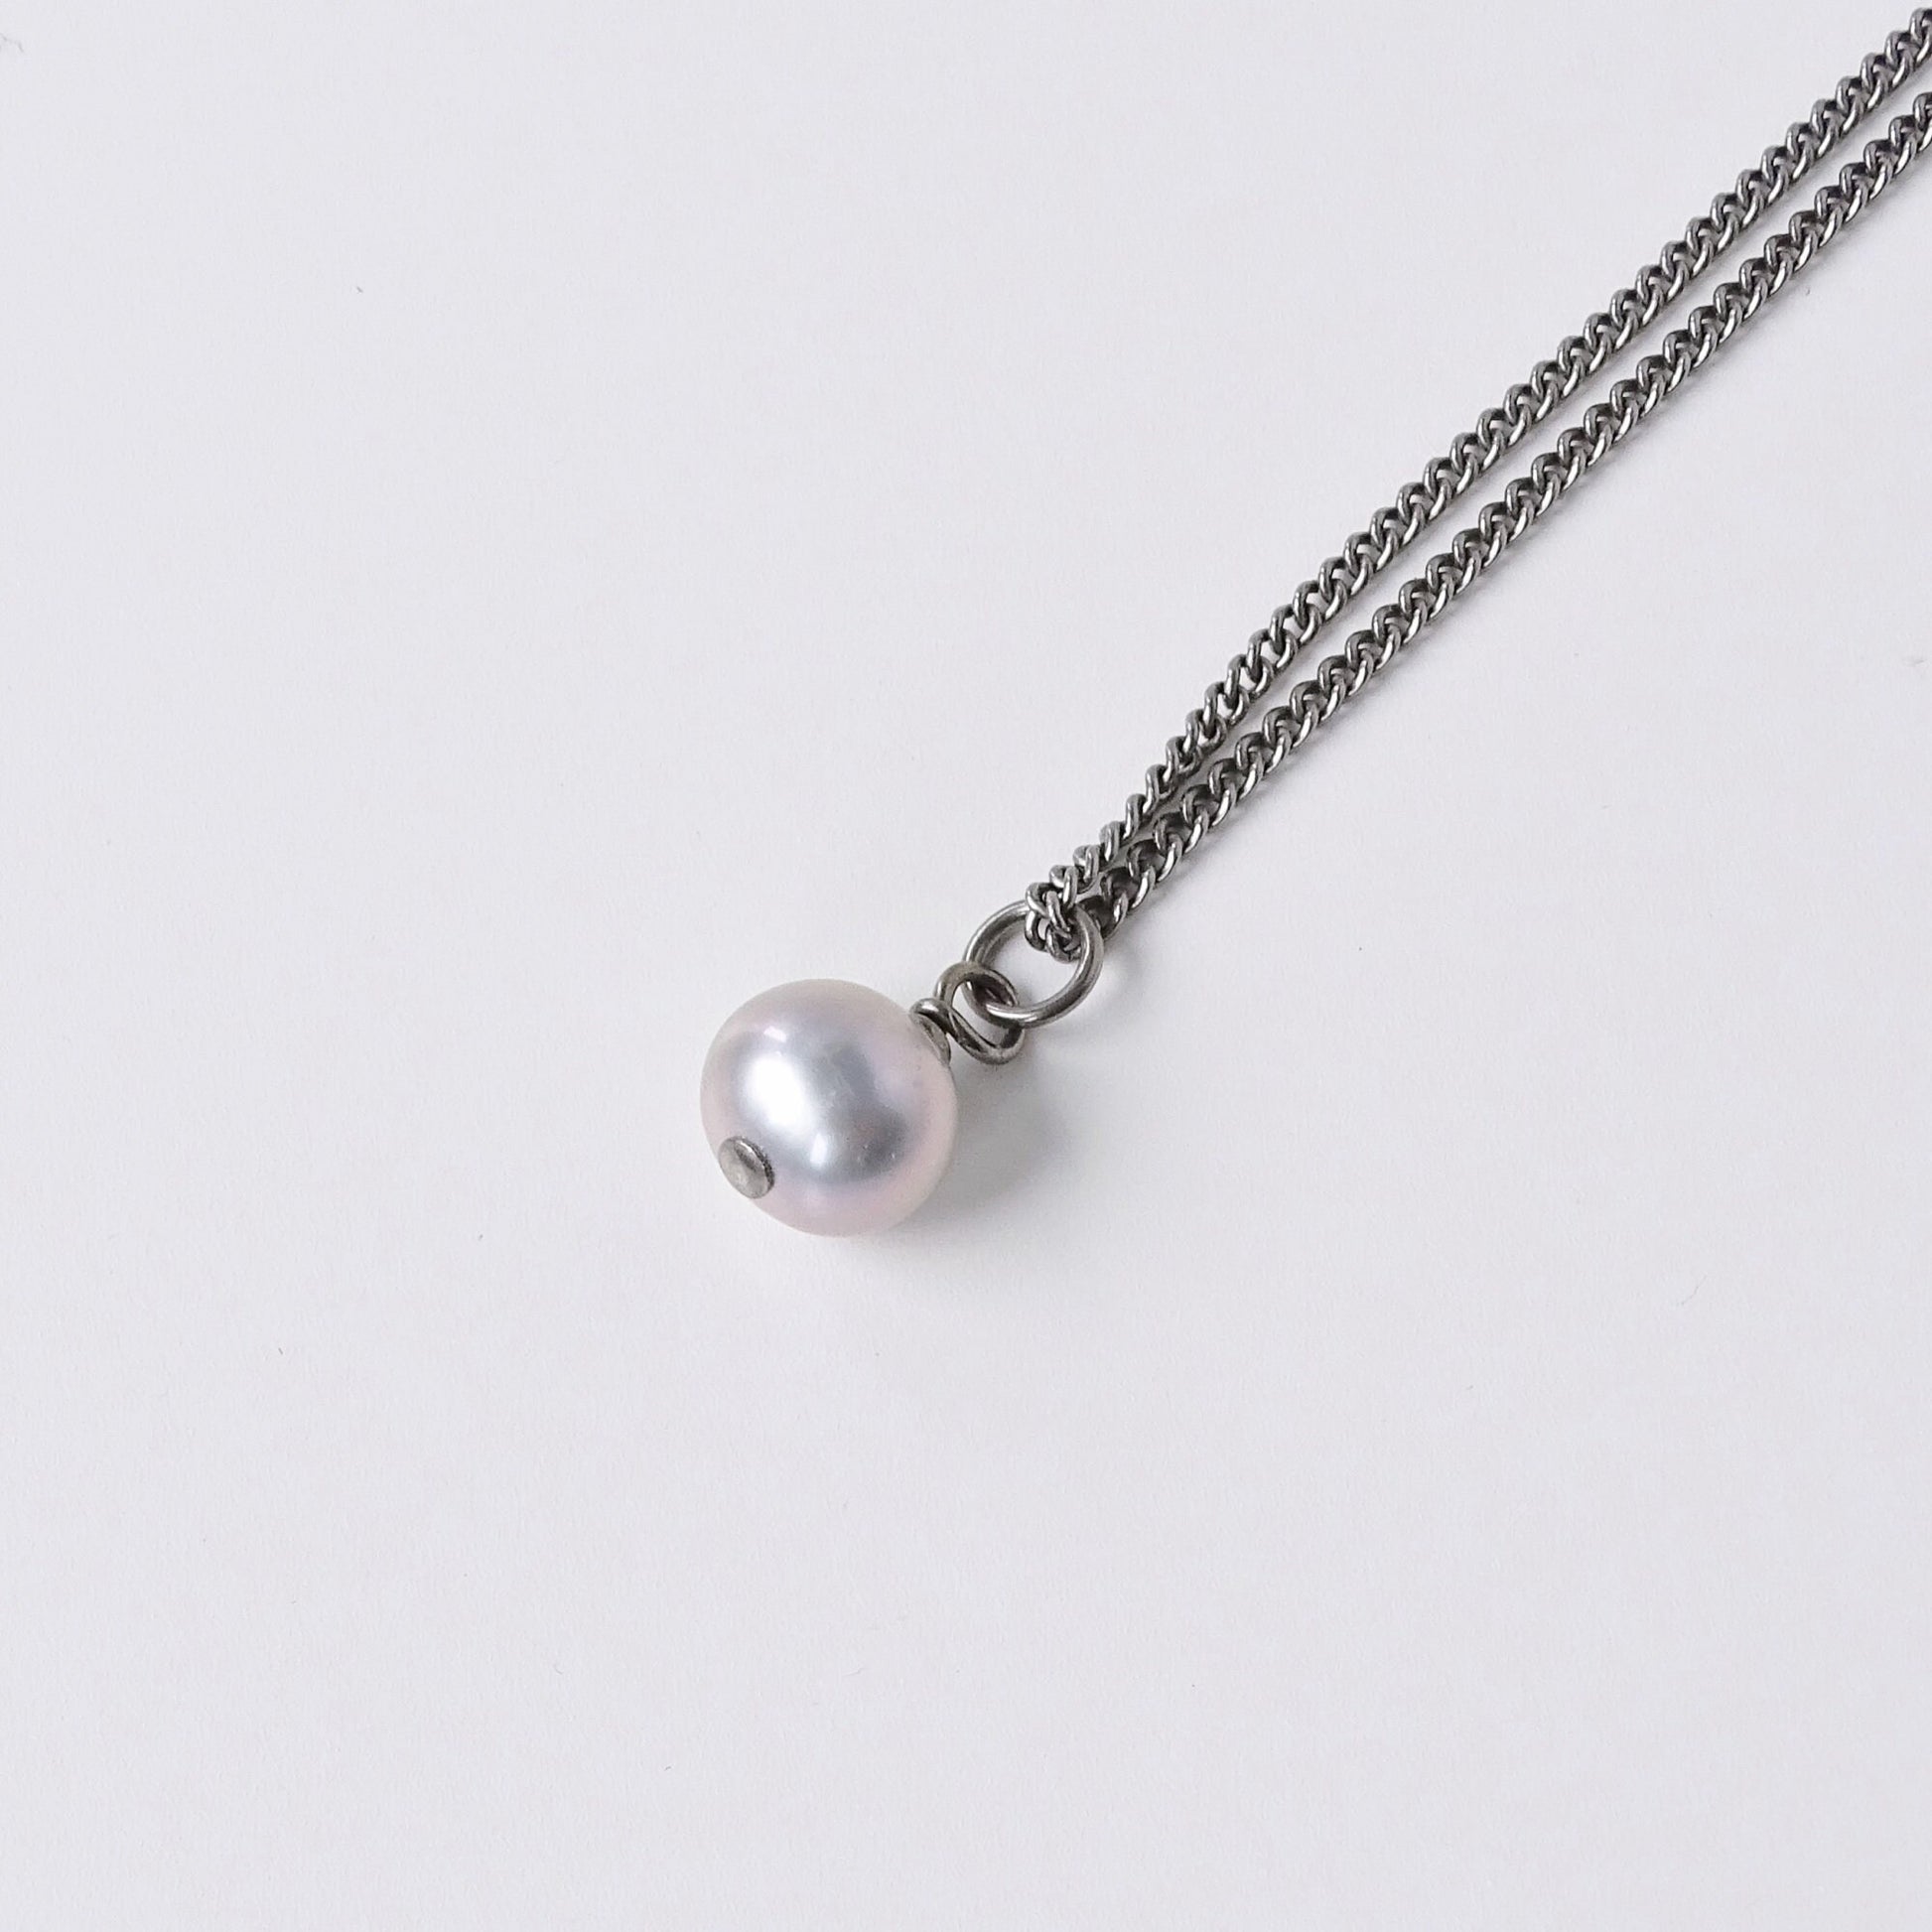 Gray Pearl Pendant Titanium Necklace, Real Pearl Necklace for Sensitive Skin, Freshwater Pearl Titanium Jewelry, Hypoallergenic Nickel Free